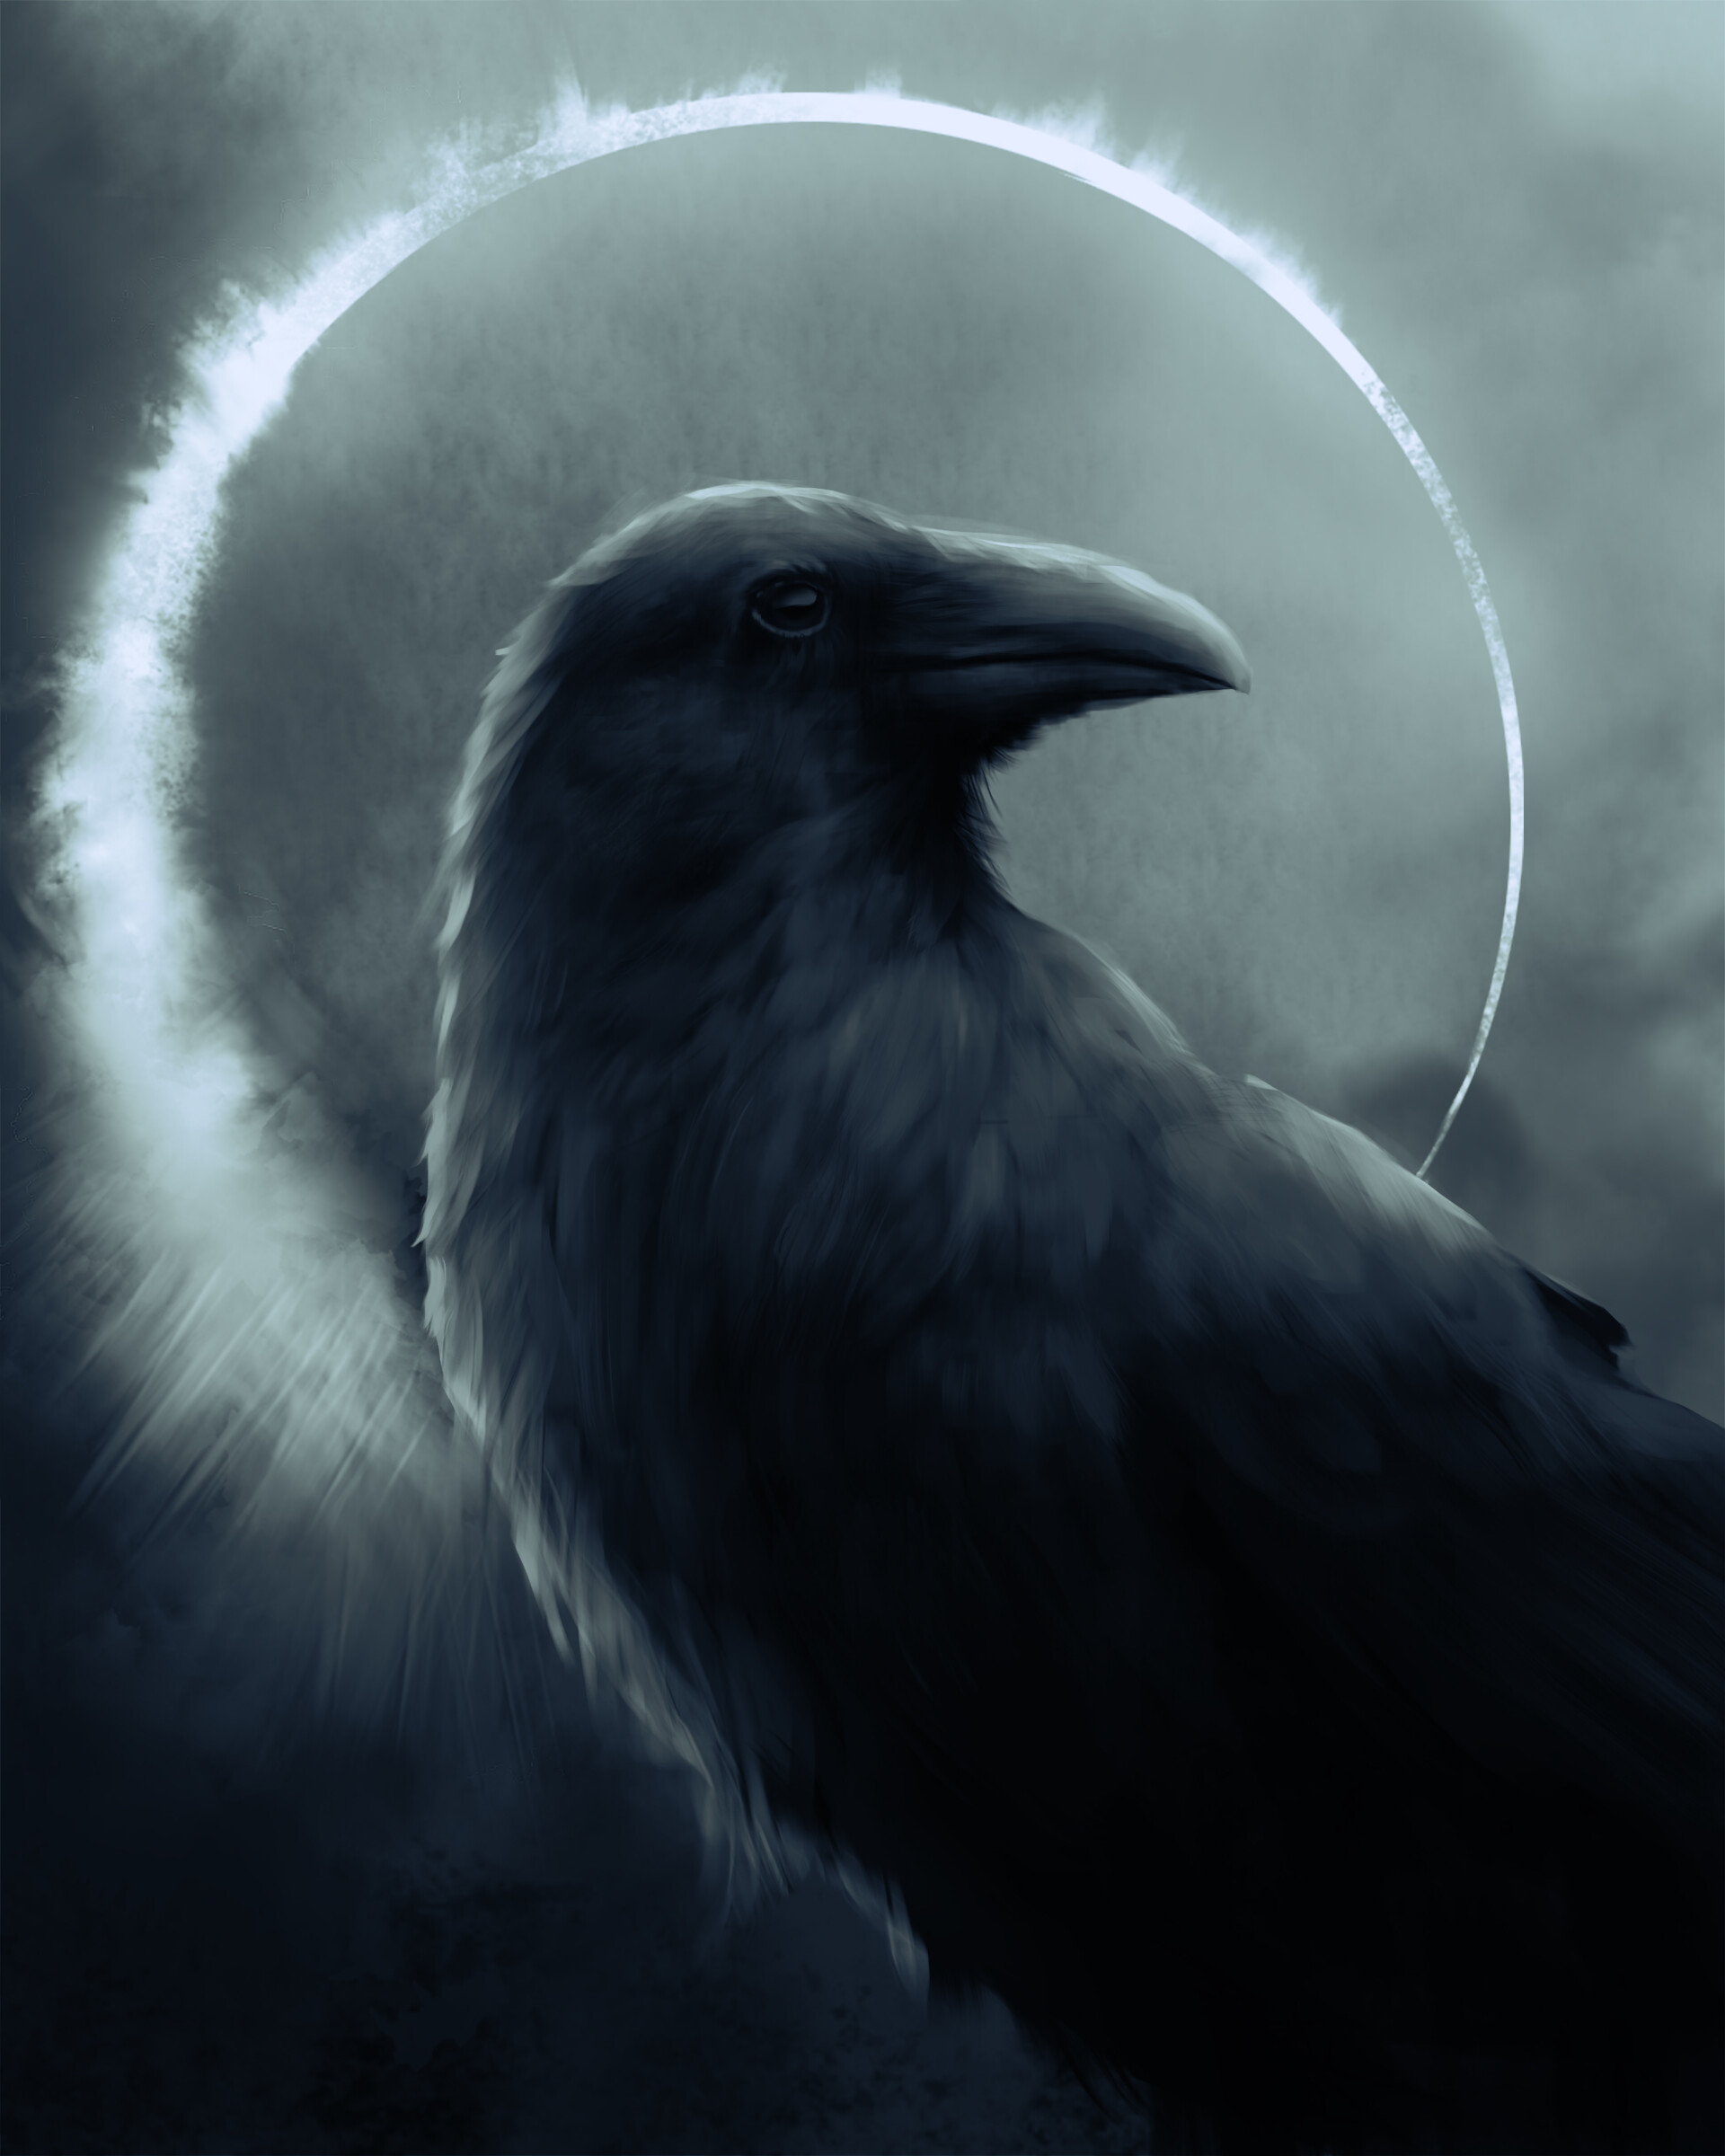 54271 download wallpaper raven, art, dark, bird, circle screensavers and pictures for free